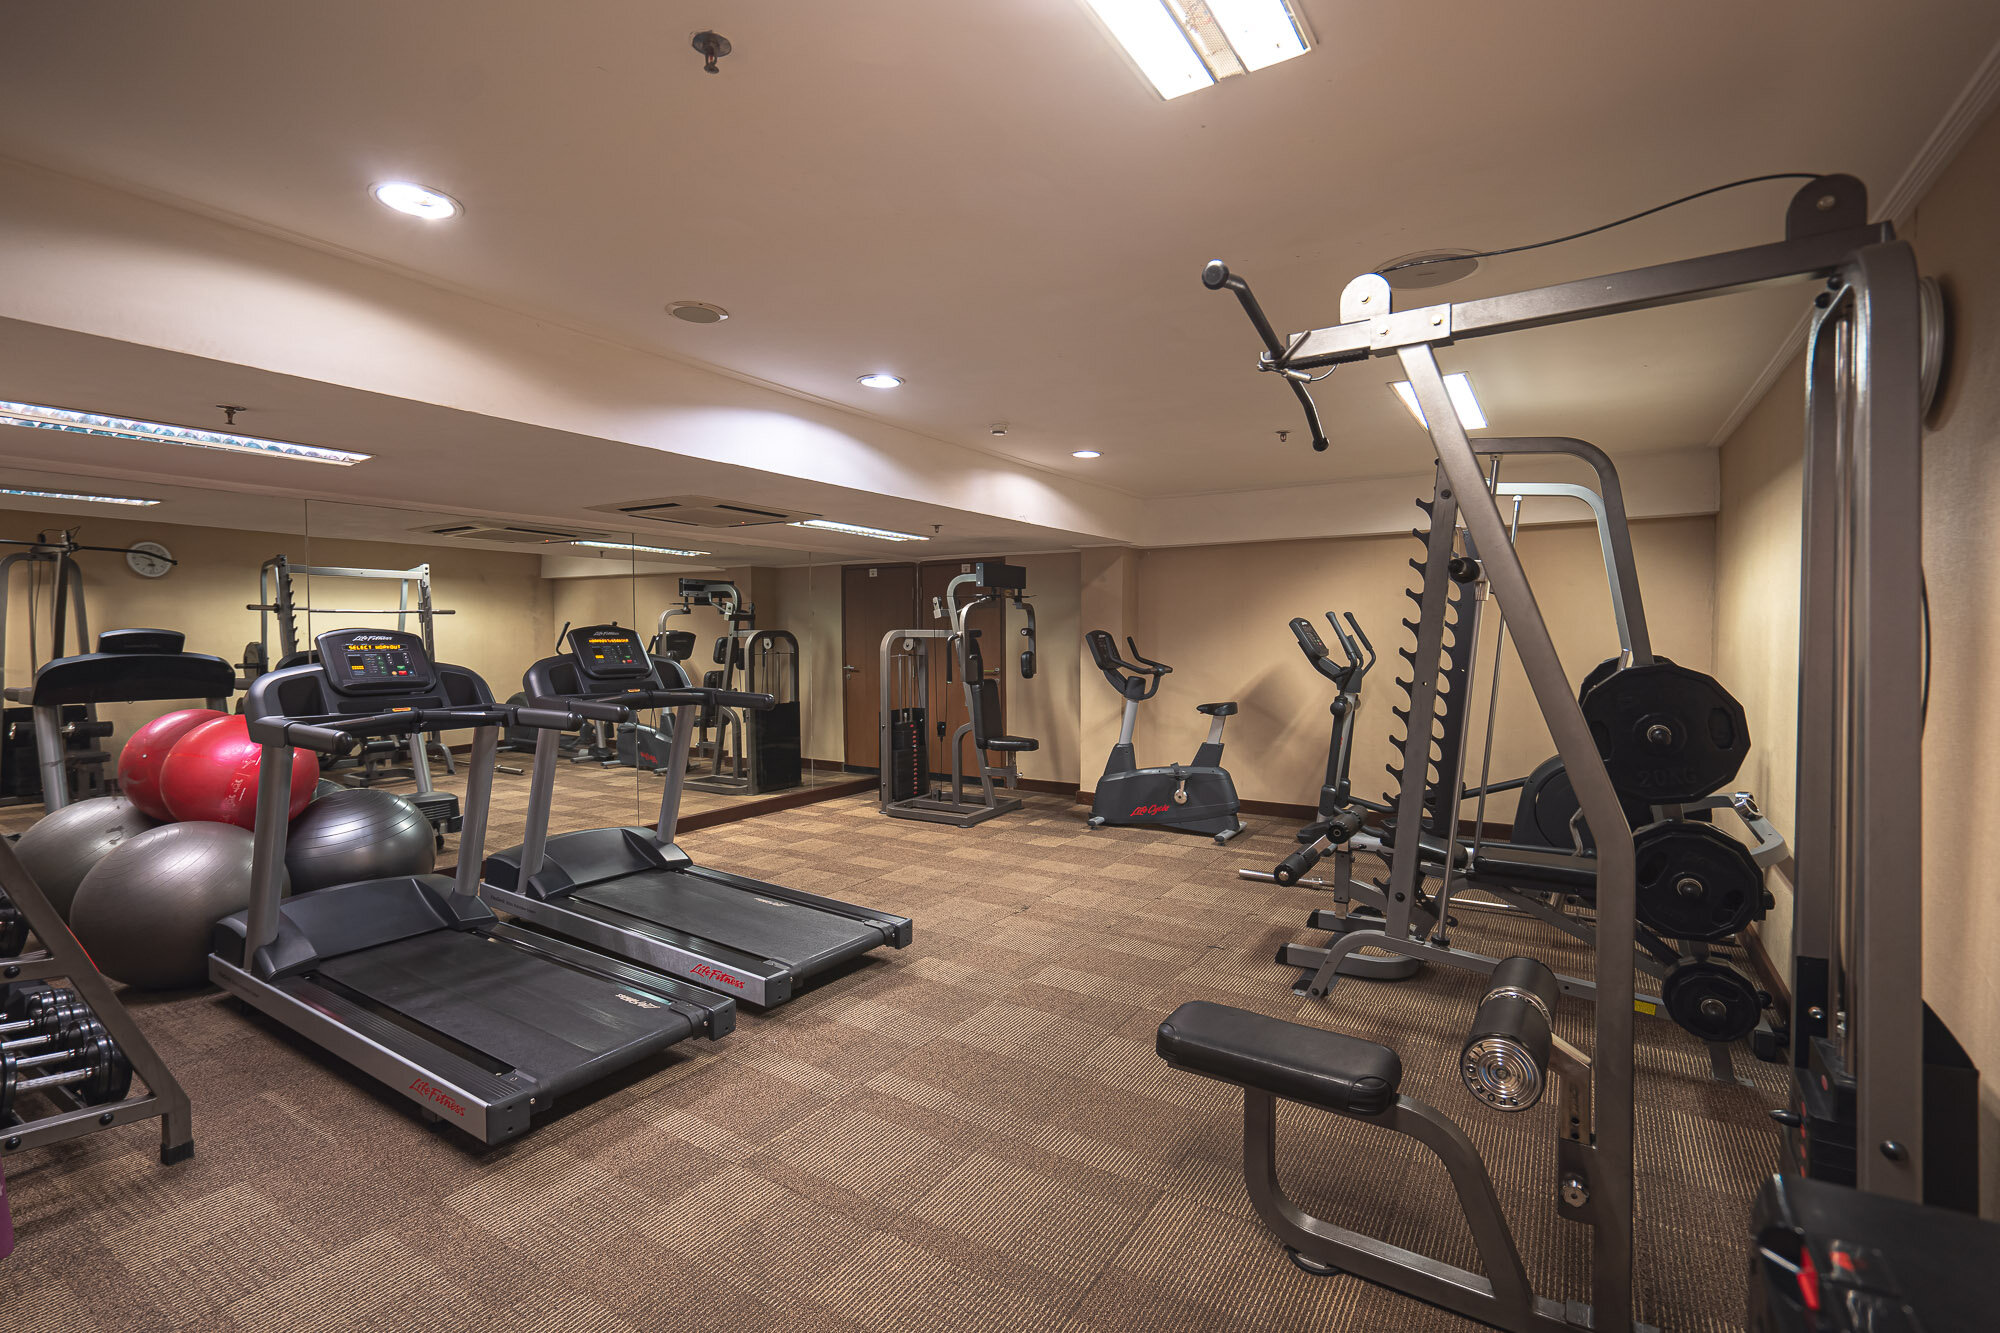 The gym is very small and equipments are positioned too close to one another